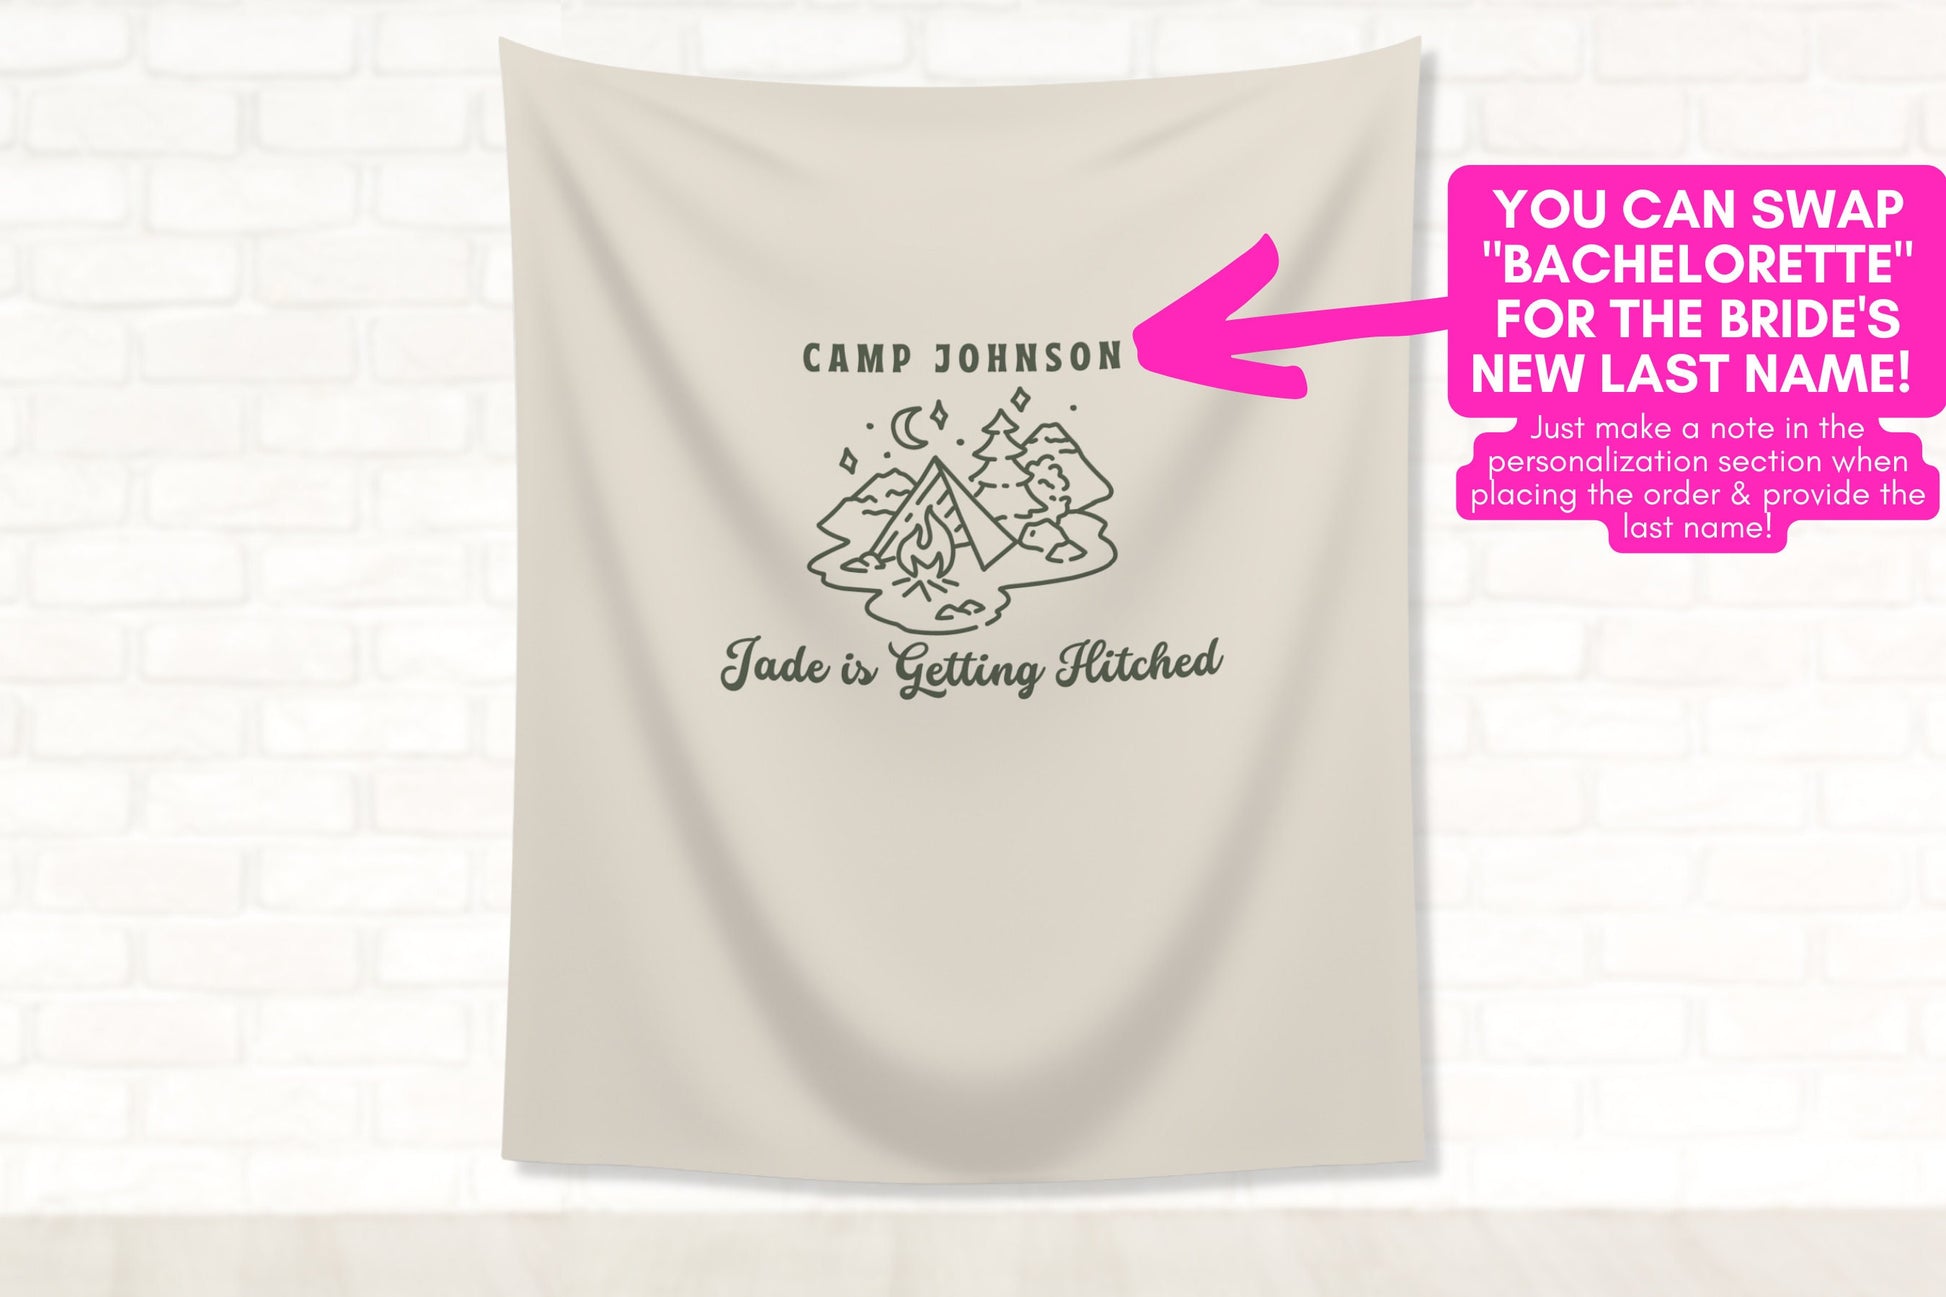 Camp Bachelorette Party Personalized Backdrop | Lake Bachelorette Party Welcome Sign and Banner Set